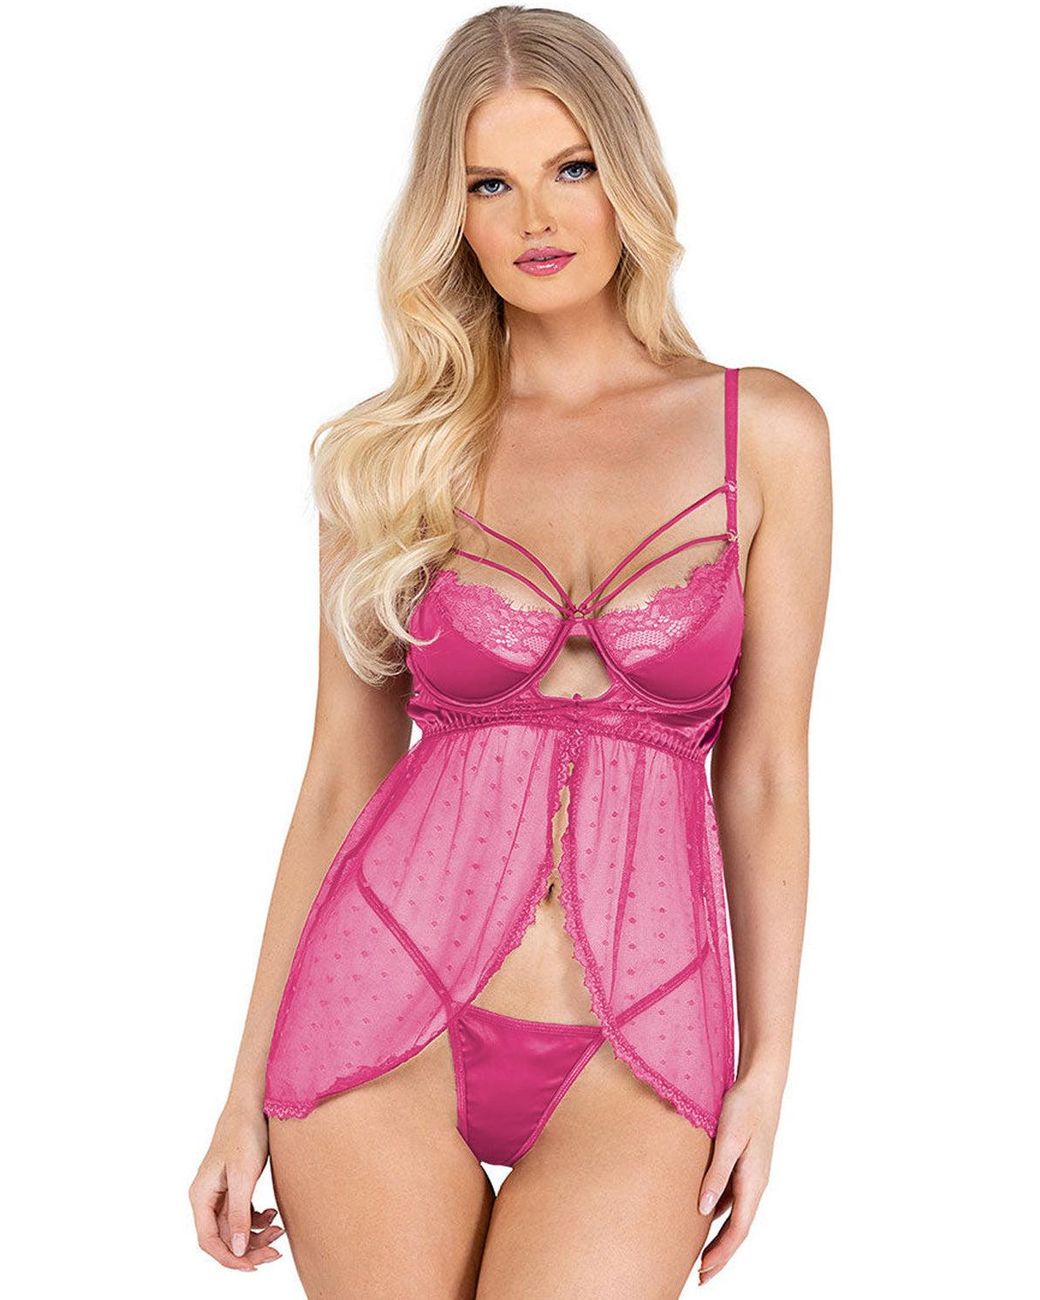 Briar Thorn V Neck Adjustable Straps Lace Splicing Babydoll With Thong in Pink Womens Clothing Lingerie Lingerie and panty sets 